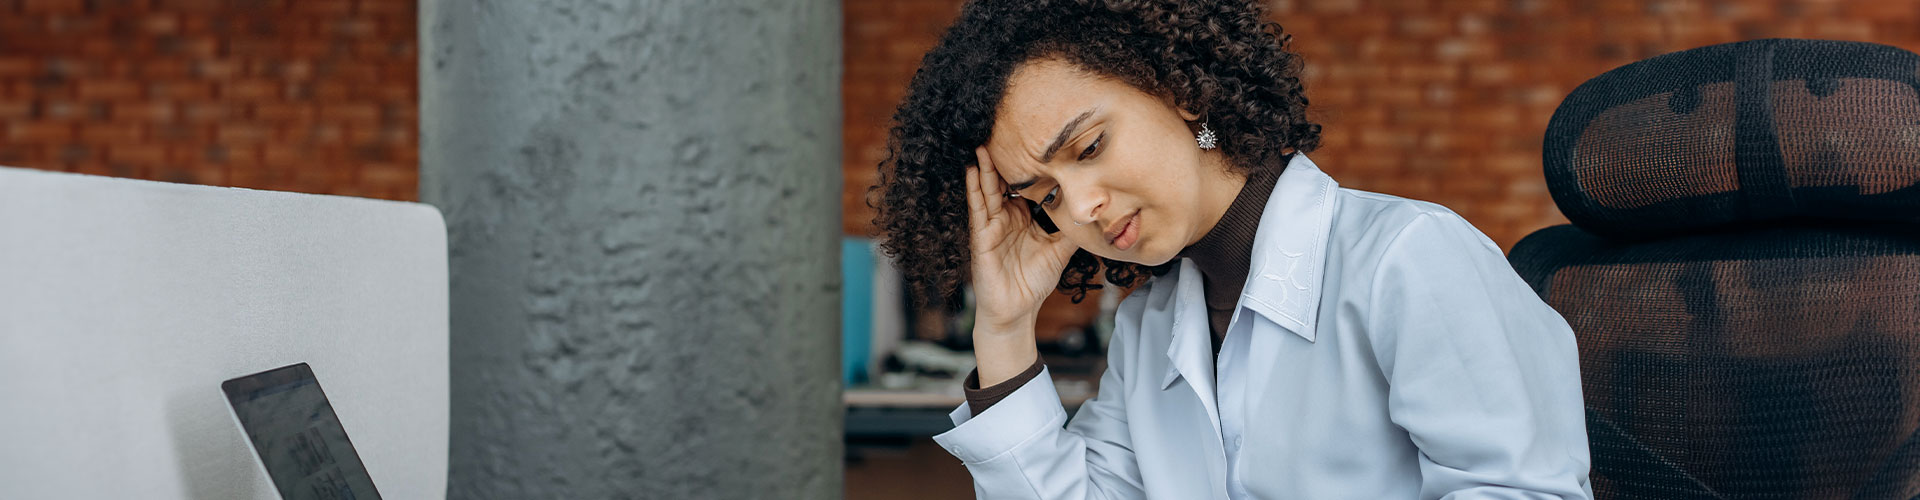 Photo of a woman stressed and overwhelmed at work. Therapy for work burnout in Chicago, IL | occupational stress | stress and burnout in healthcare professionals | corporate burnout | in-person therapy | 63122 | forrest glen 60630 | Lincoln Park is 60614 | north center 60613 | 60618.